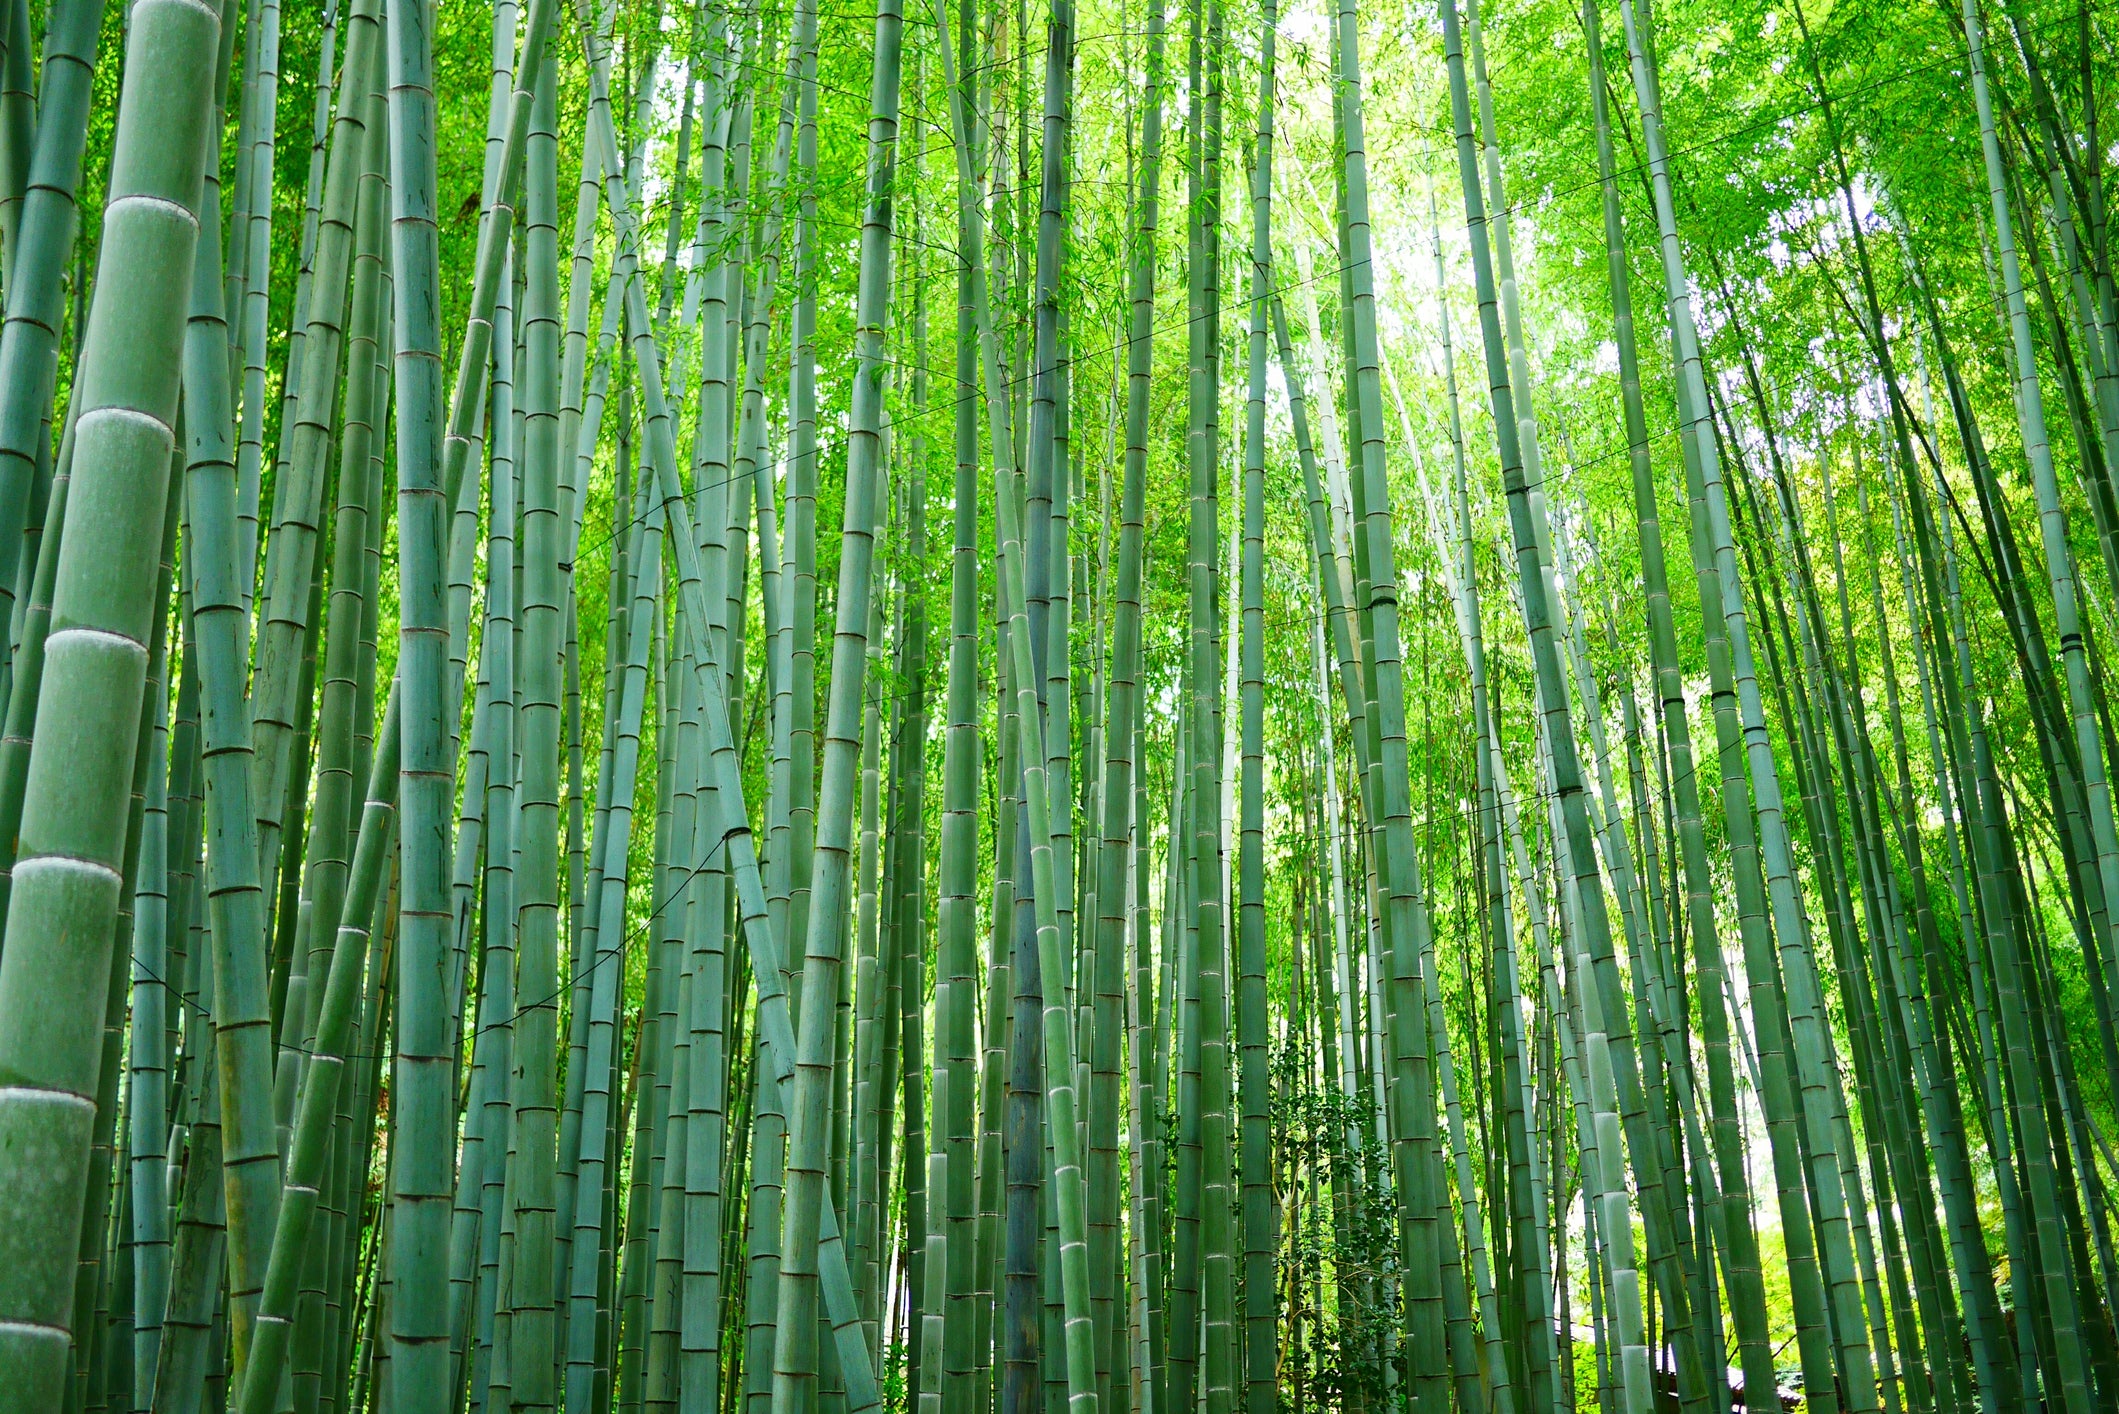 A photo of a bamboo forest that may be harvested to make bamboo viscose fabric for clothing and apparel